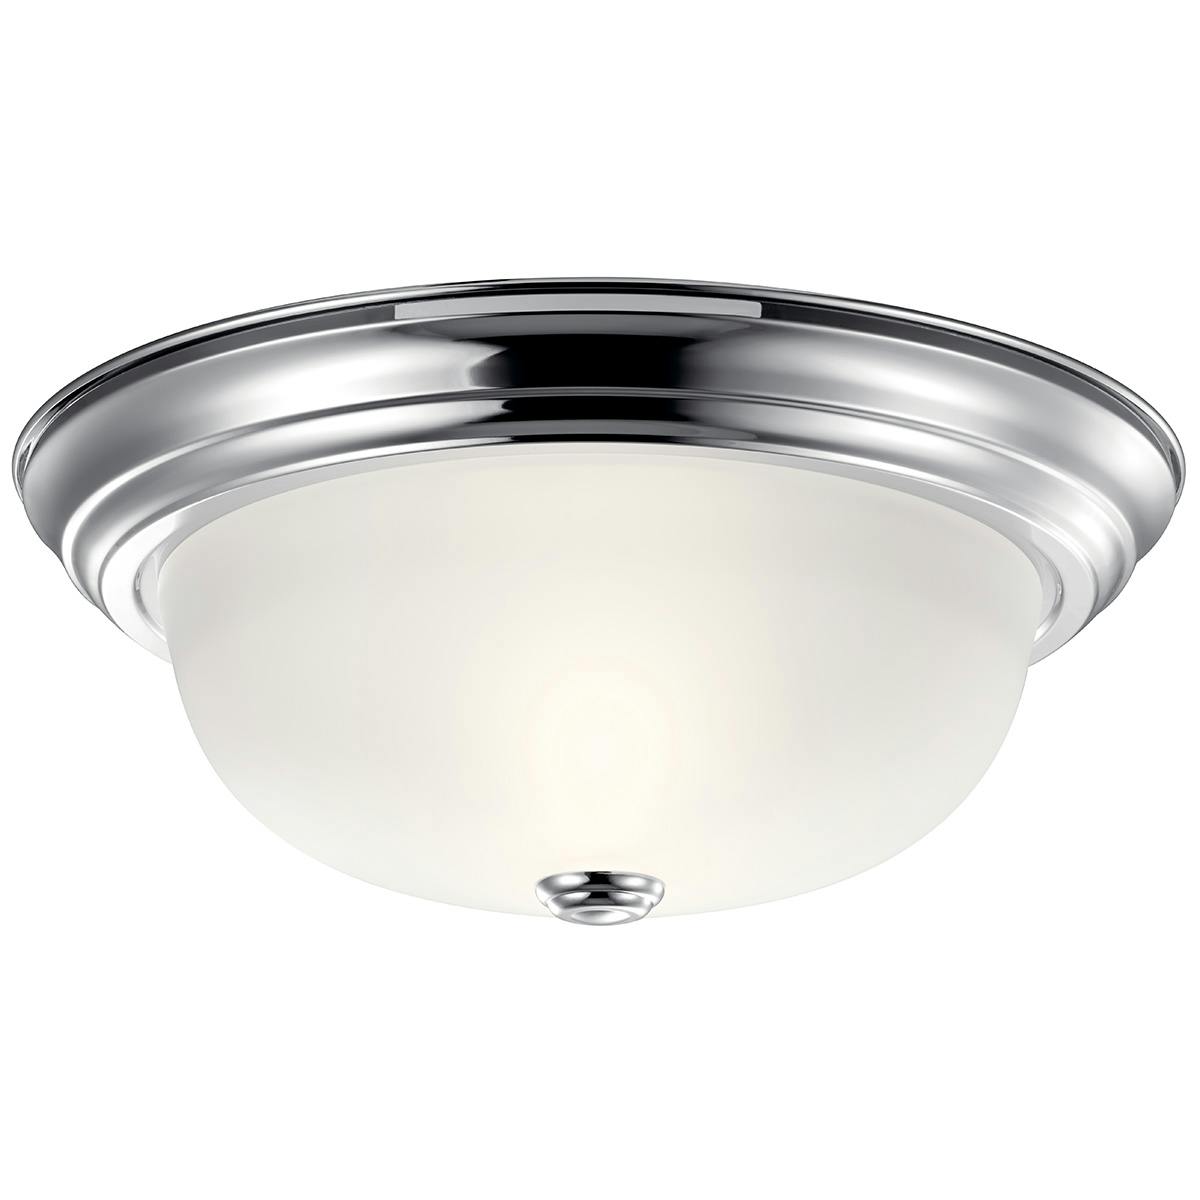 Ceiling Space 13.25" Flush Mount Chrome on a white background